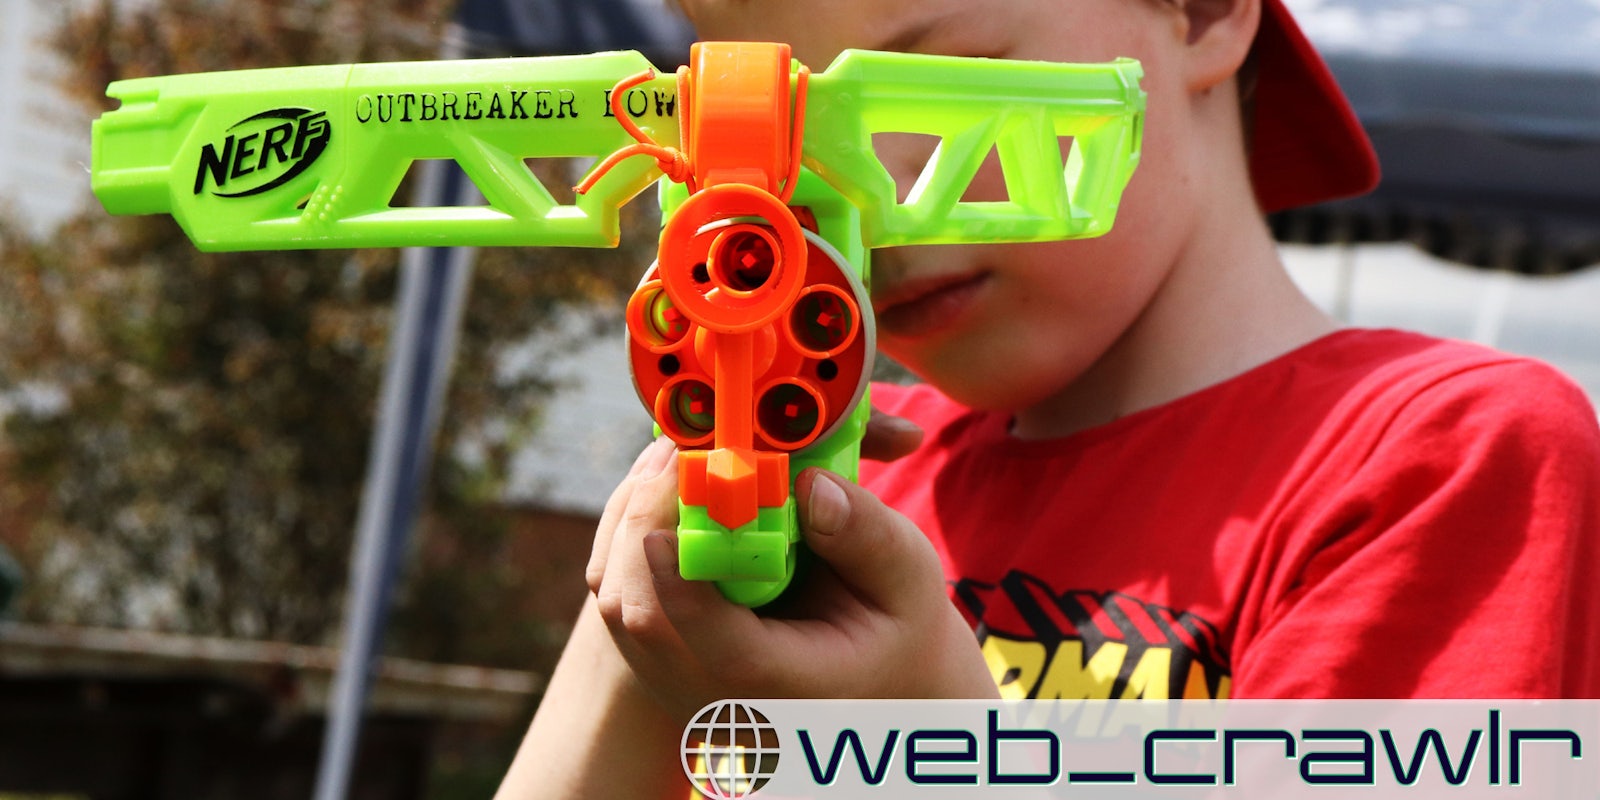 A kid holding a Nerf gun. The Daily Dot newsletter web_crawlr logo is in the bottom right corner.